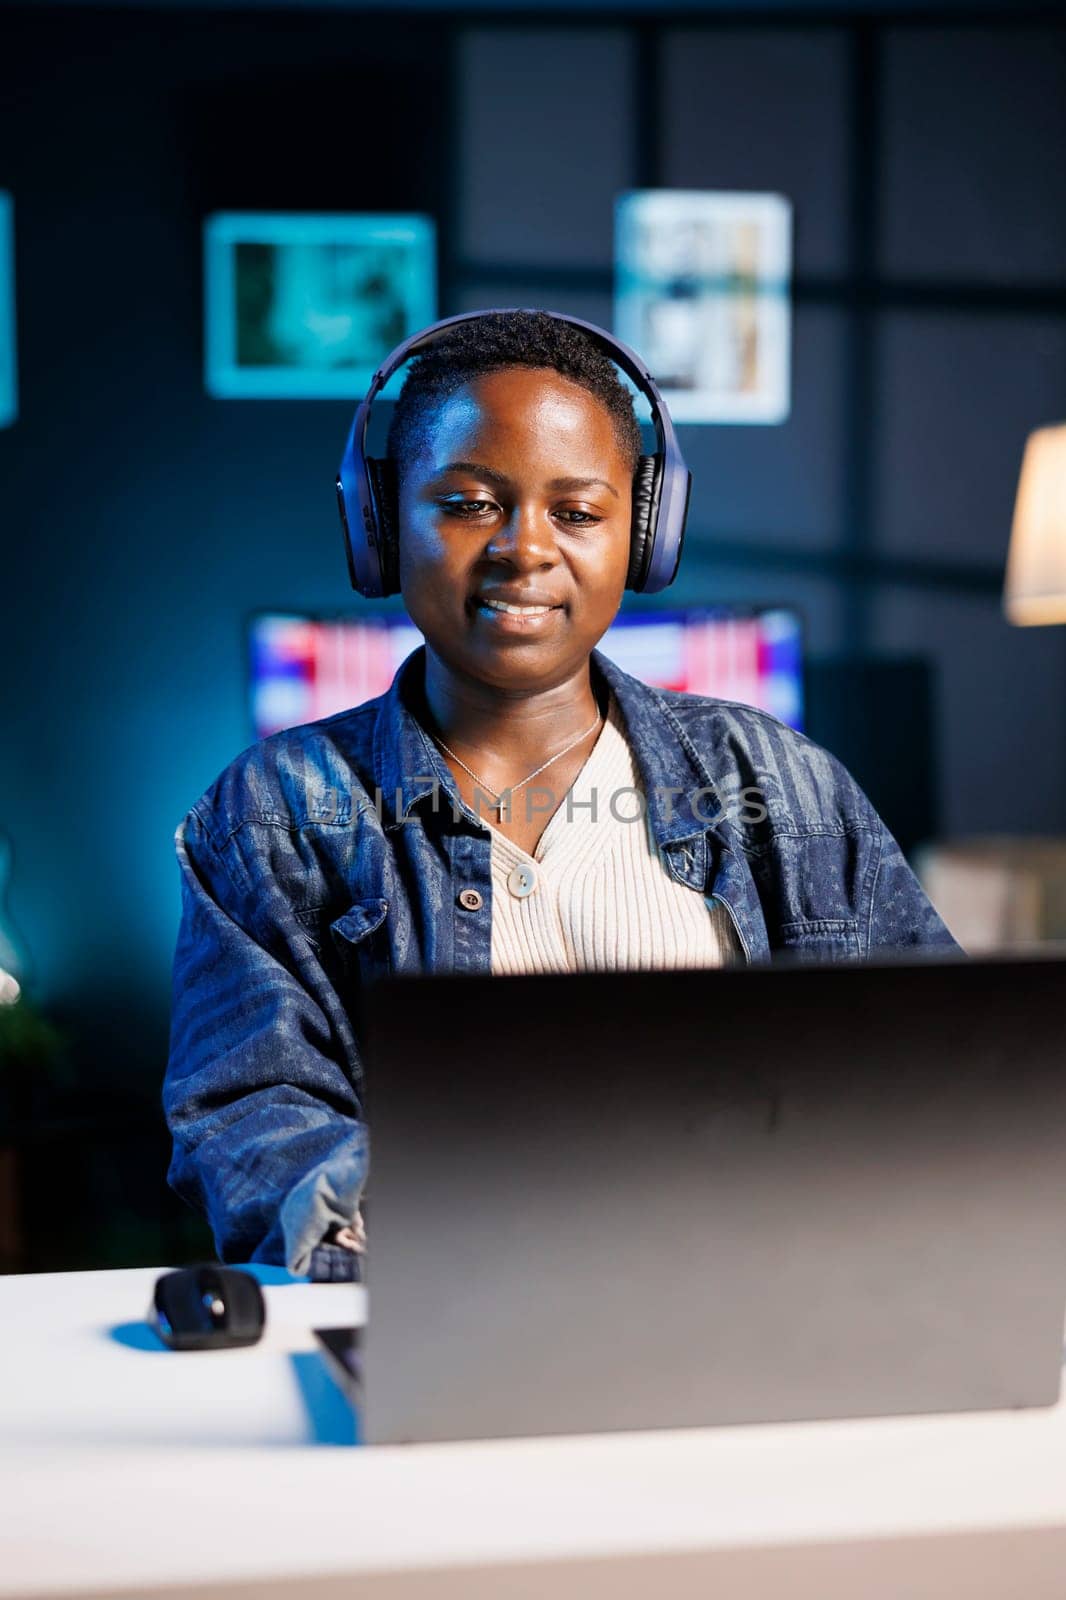 Freelancer working on a laptop, completing online tasks while listening to music through an audio headset. Portrait of African American woman using personal computer and wireless headphones.